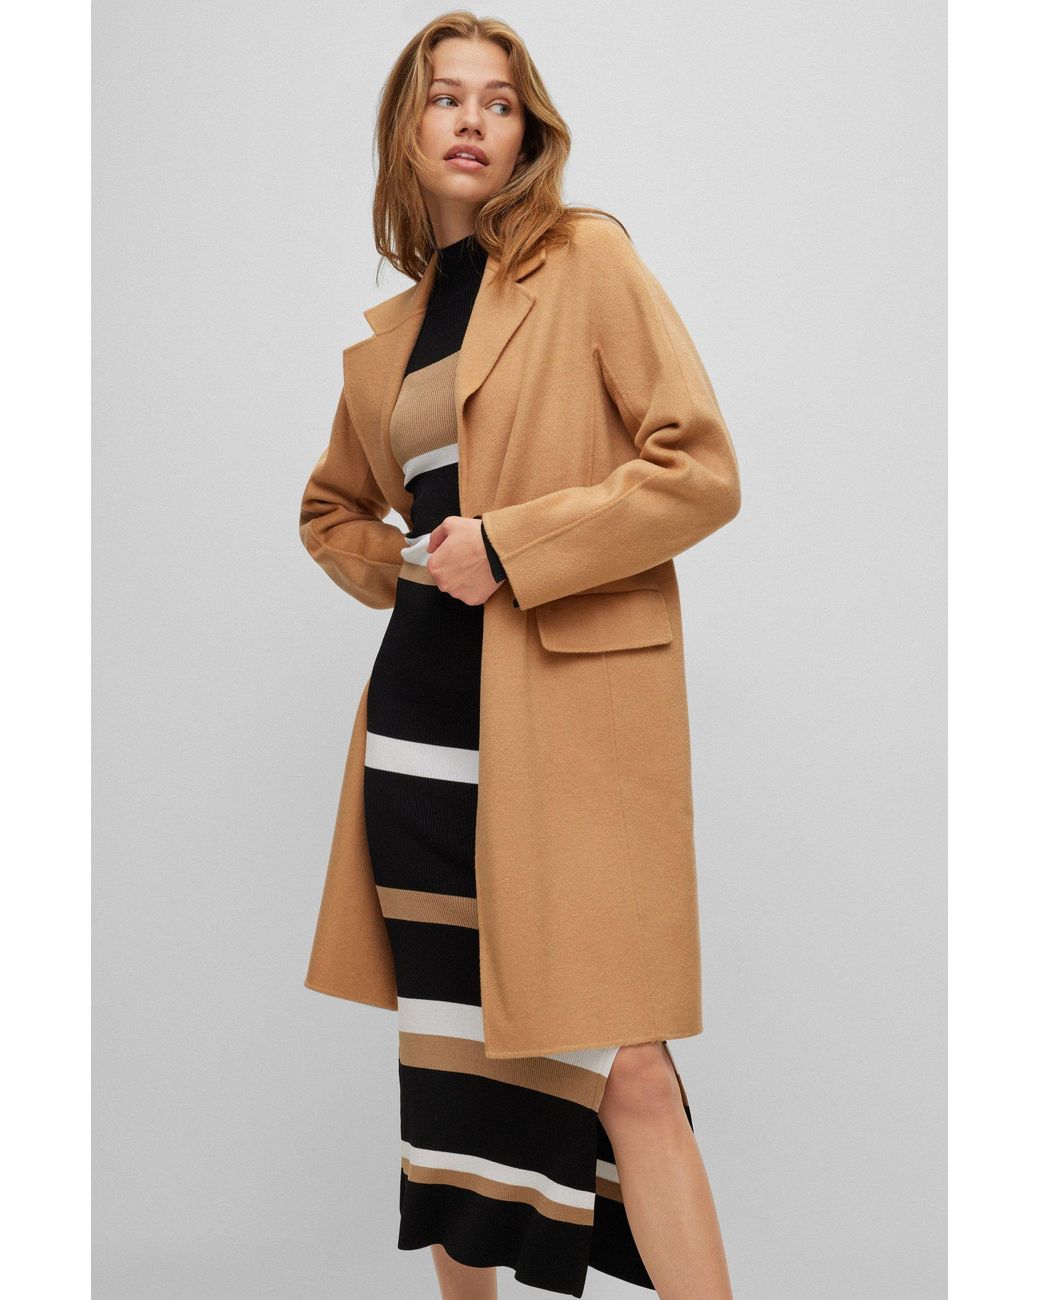 BOSS by HUGO BOSS Wool-blend Coat With Notch Lapels in Natural | Lyst  Australia